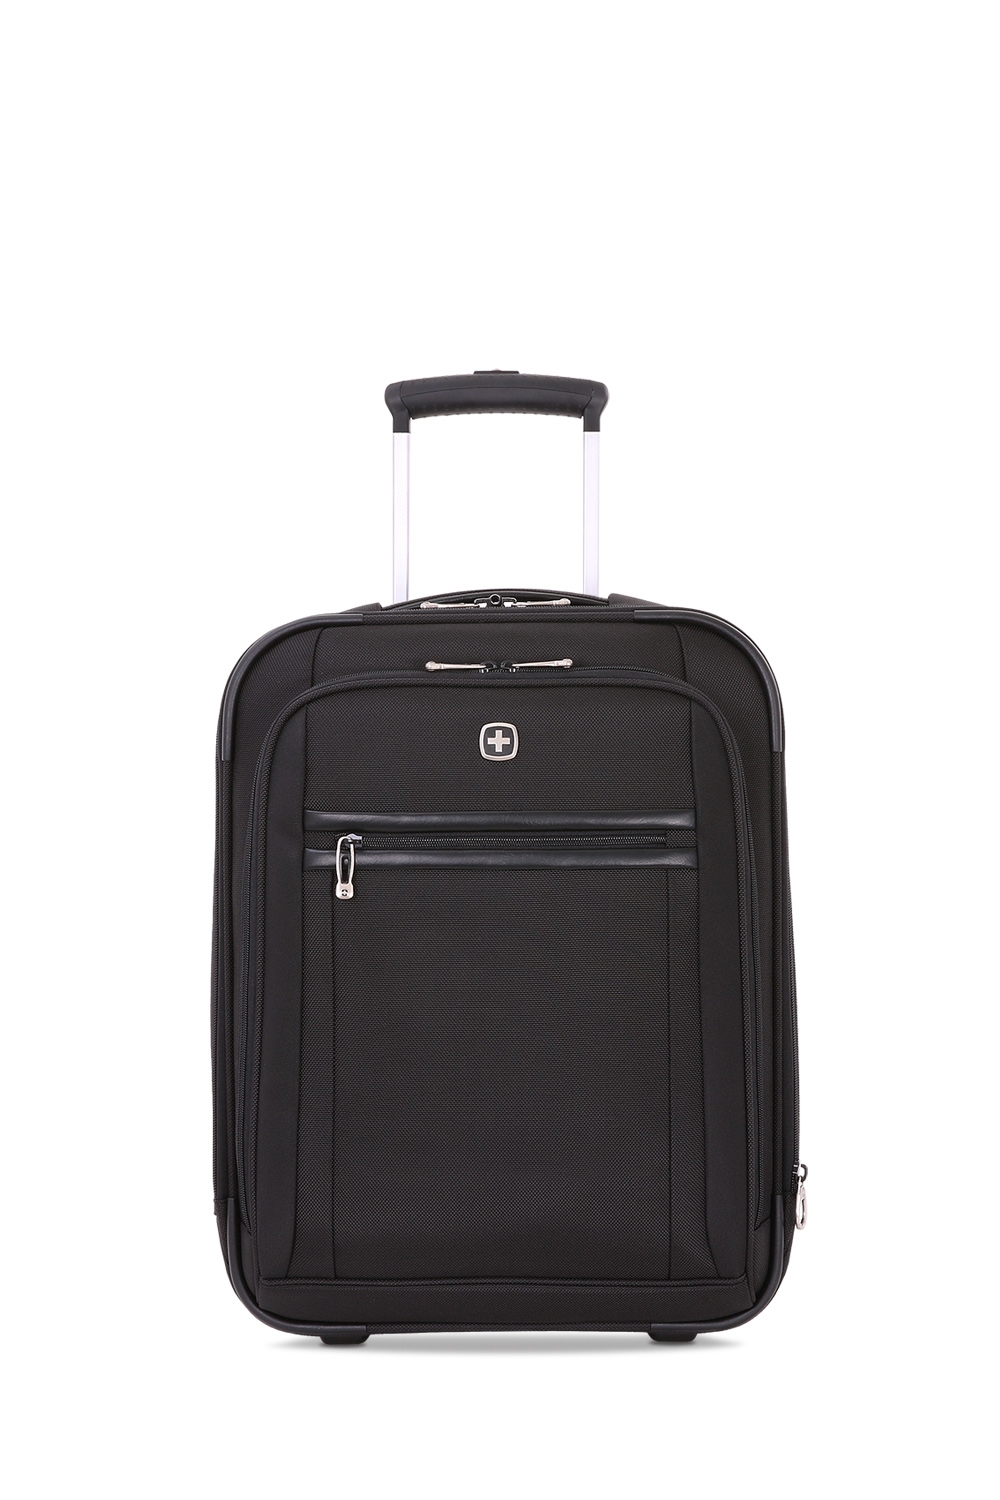 American Tourister Summer Square 55cm Cabin Suitcase at Luggage Superstore